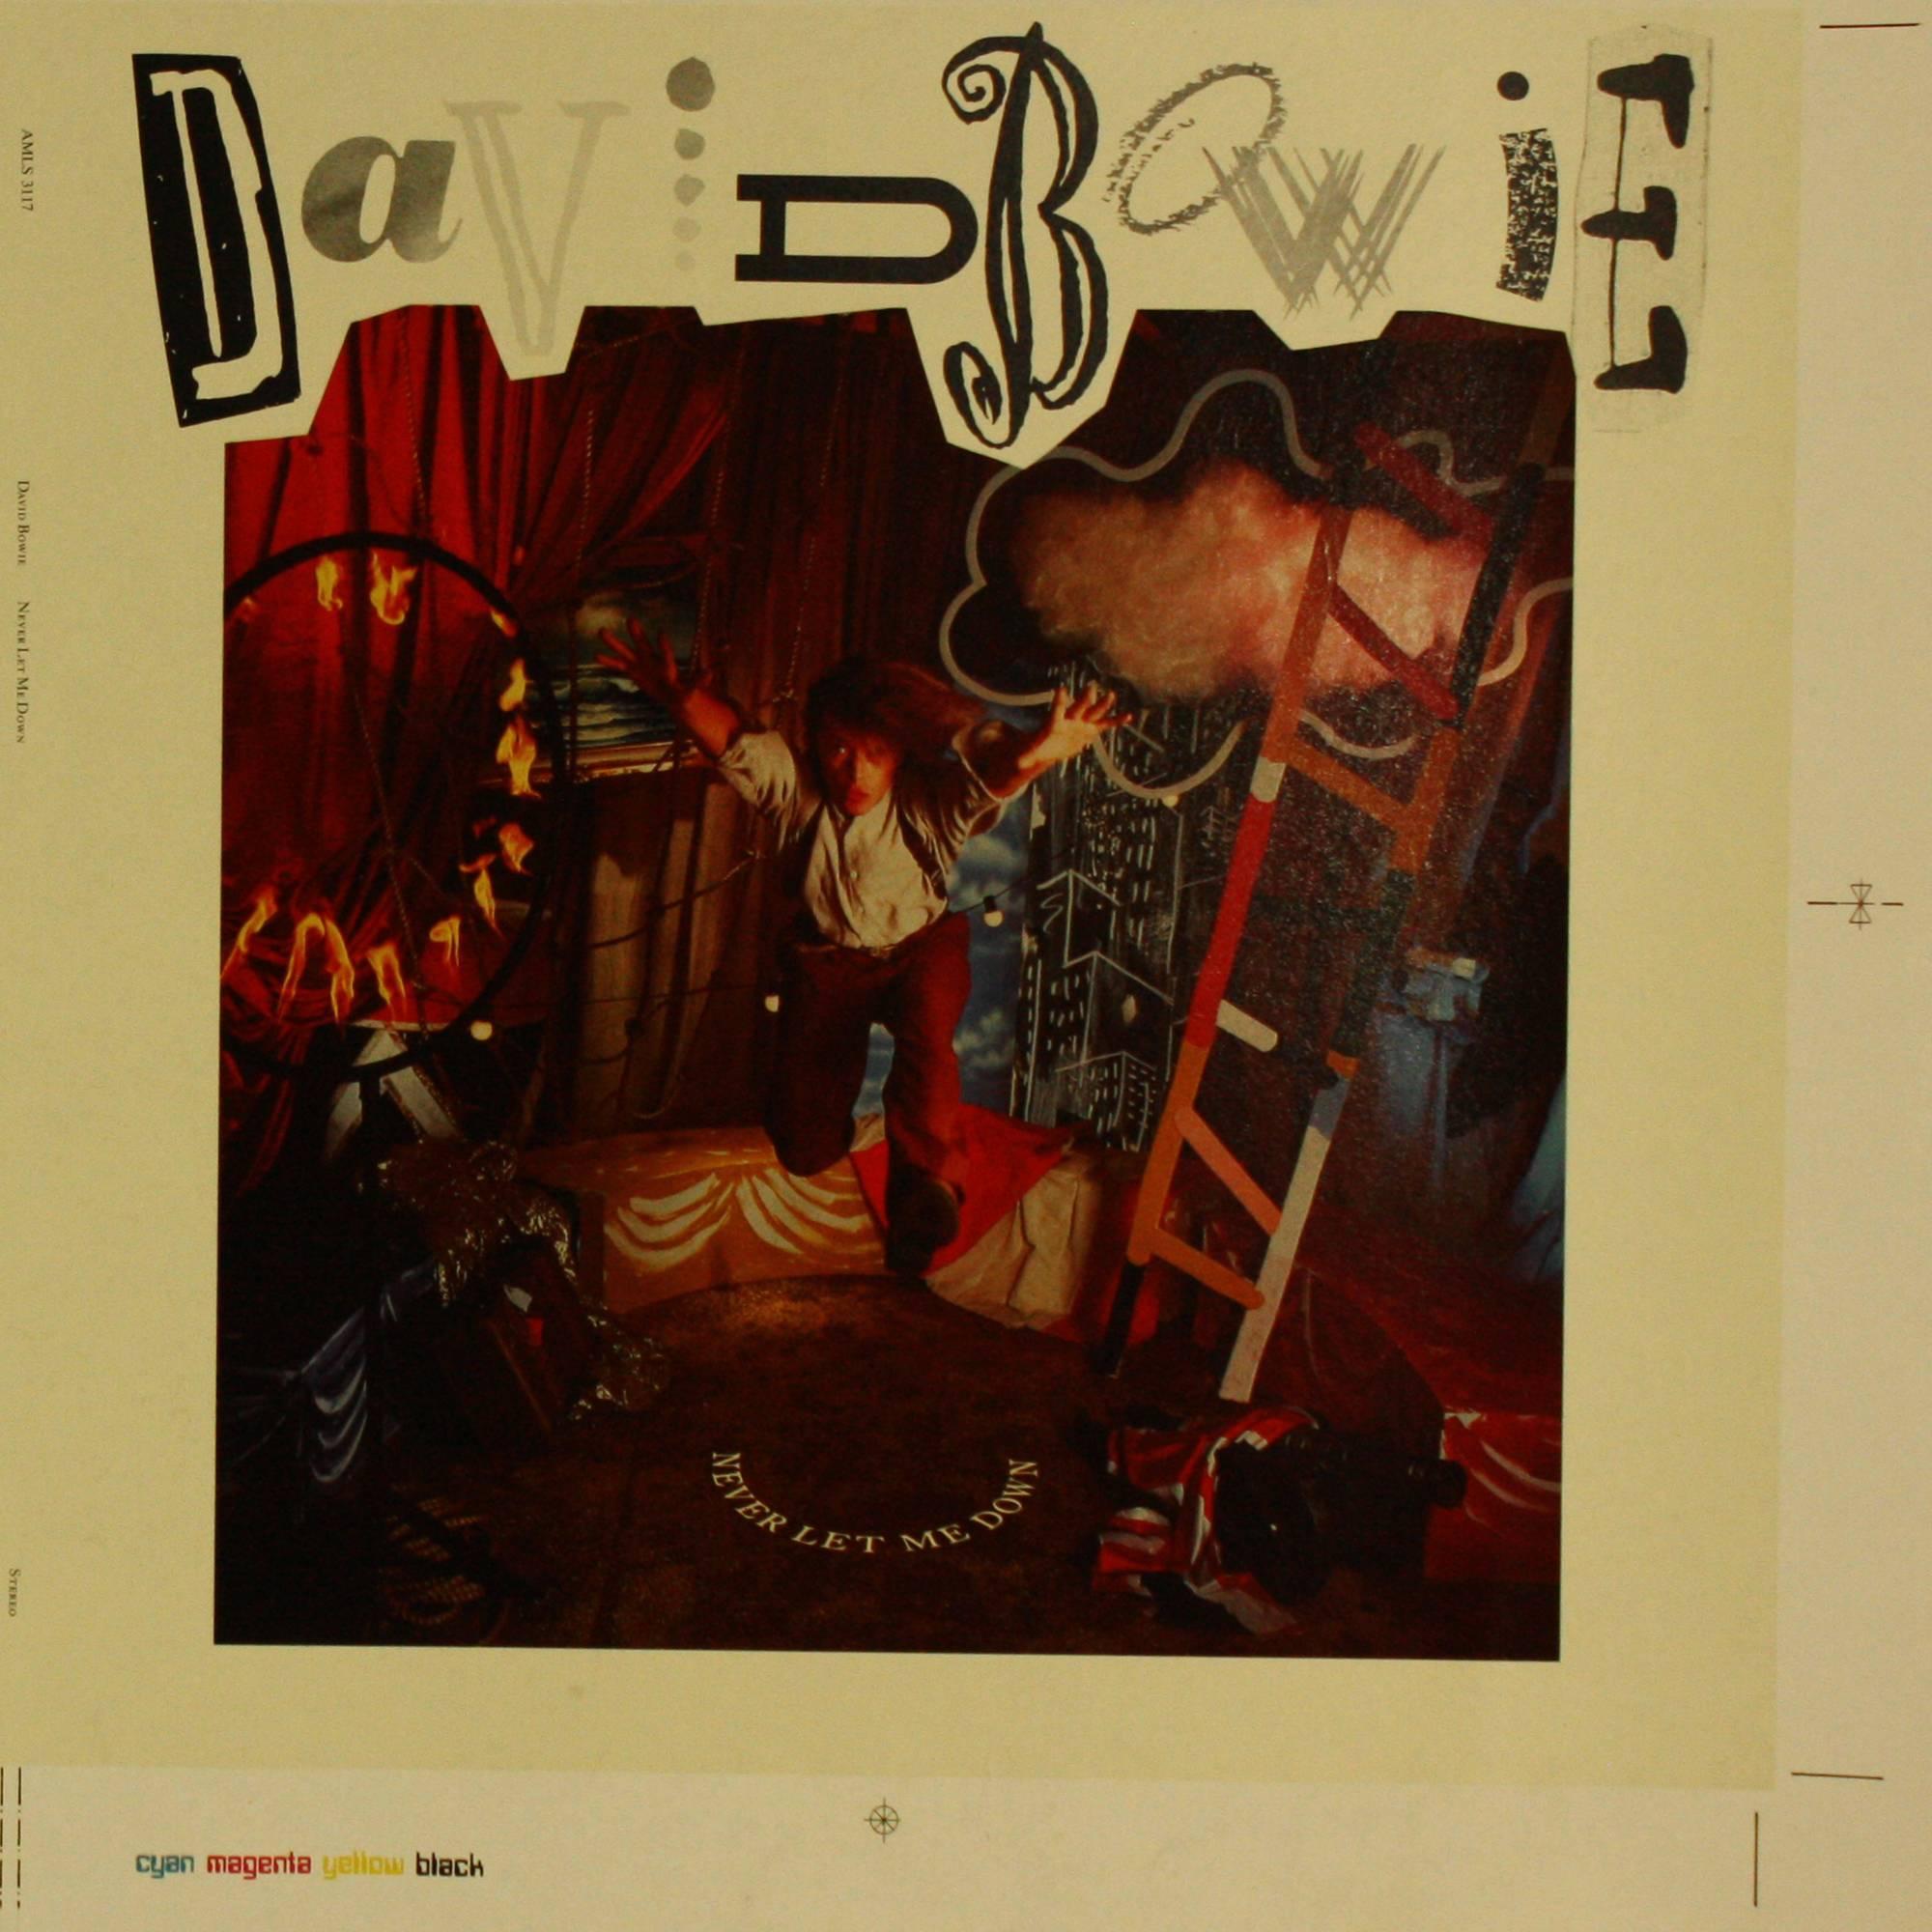             David Bowie Never Let Me Down 1987 LP Original Uncut Flat Proof Artwork
An original Production Artwork  for DAVID BOWIE 1987 LP NEVER LET ME DOWN, on card measuring approx 17 ins ( 432 mm ) by 27 ins ( 686 mm )

Produced by the awrd